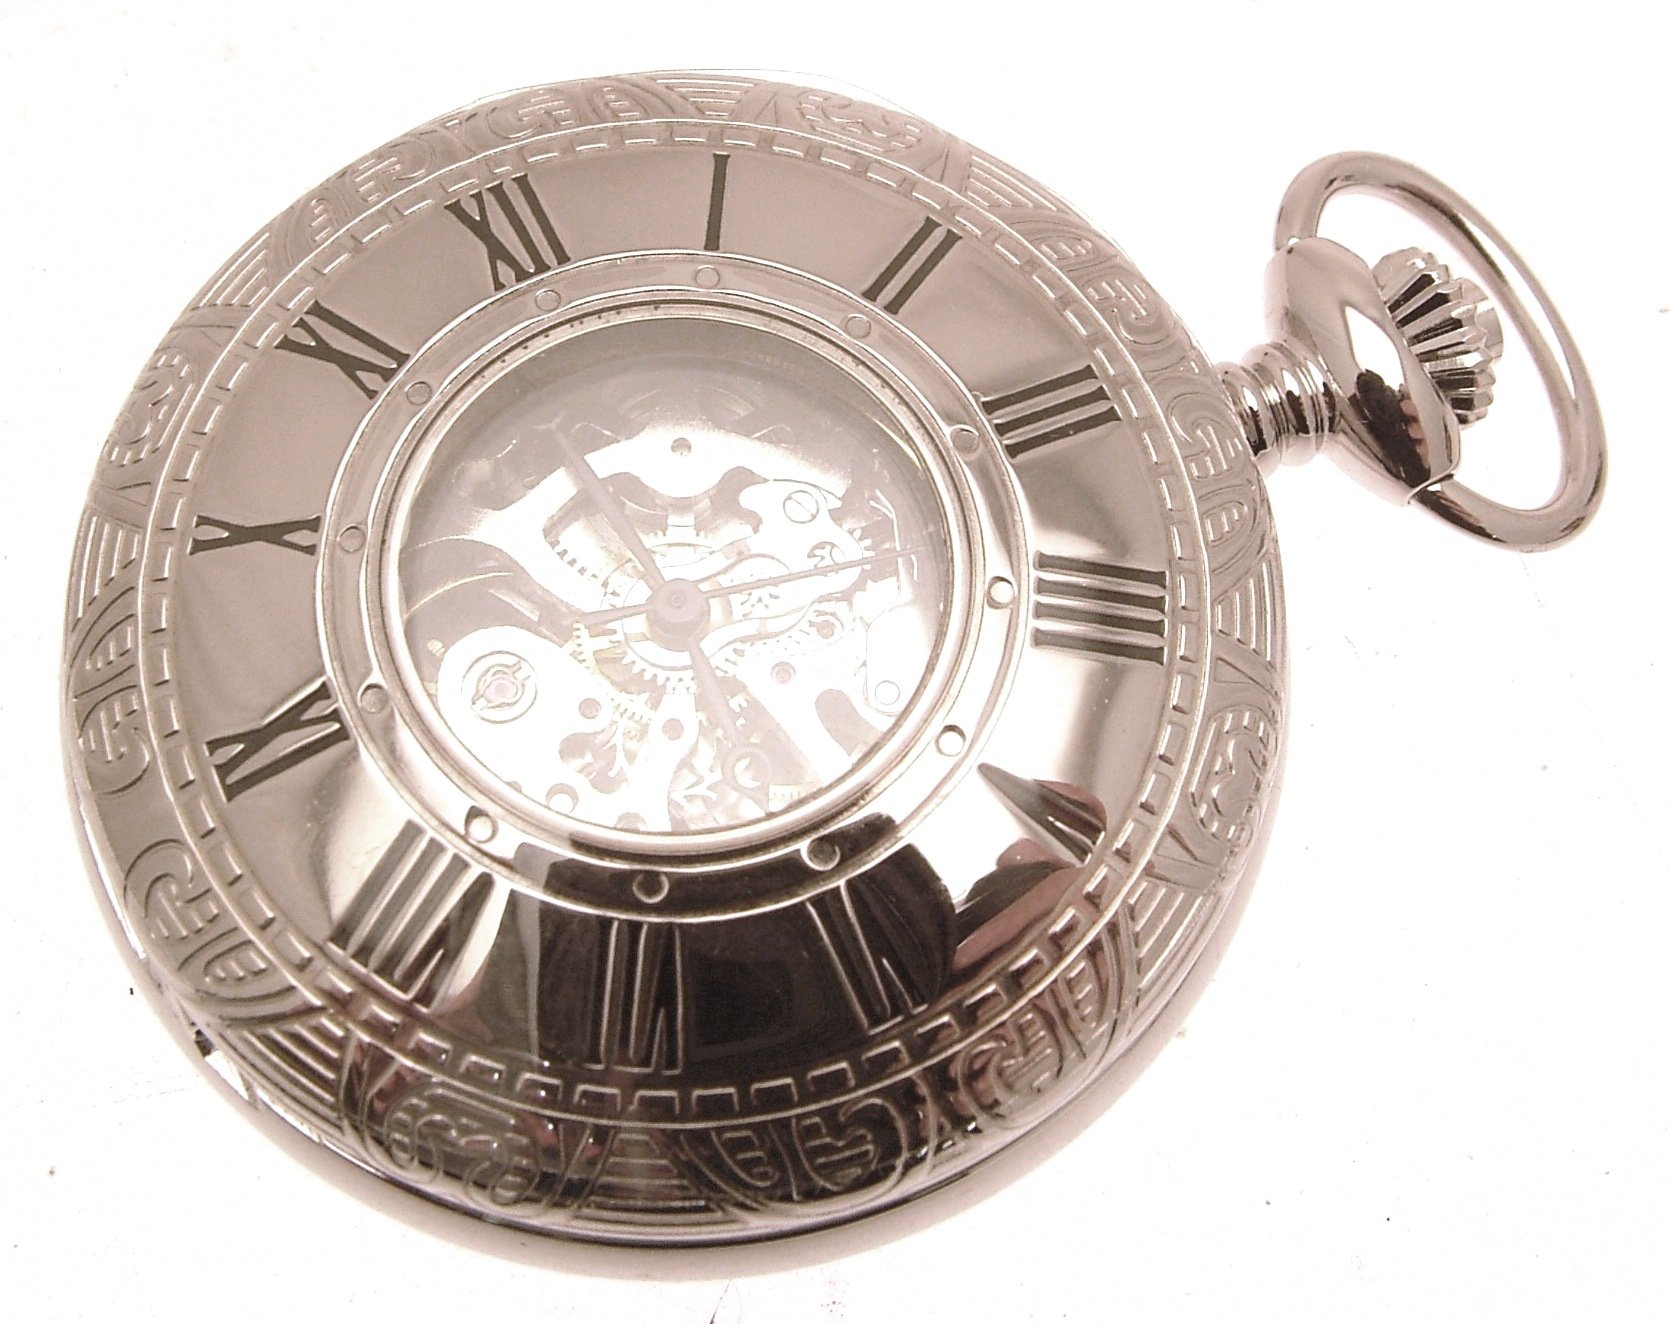 Silver Colour Metal cased Half Hunter Pocket Watch with Window, Chain and fob